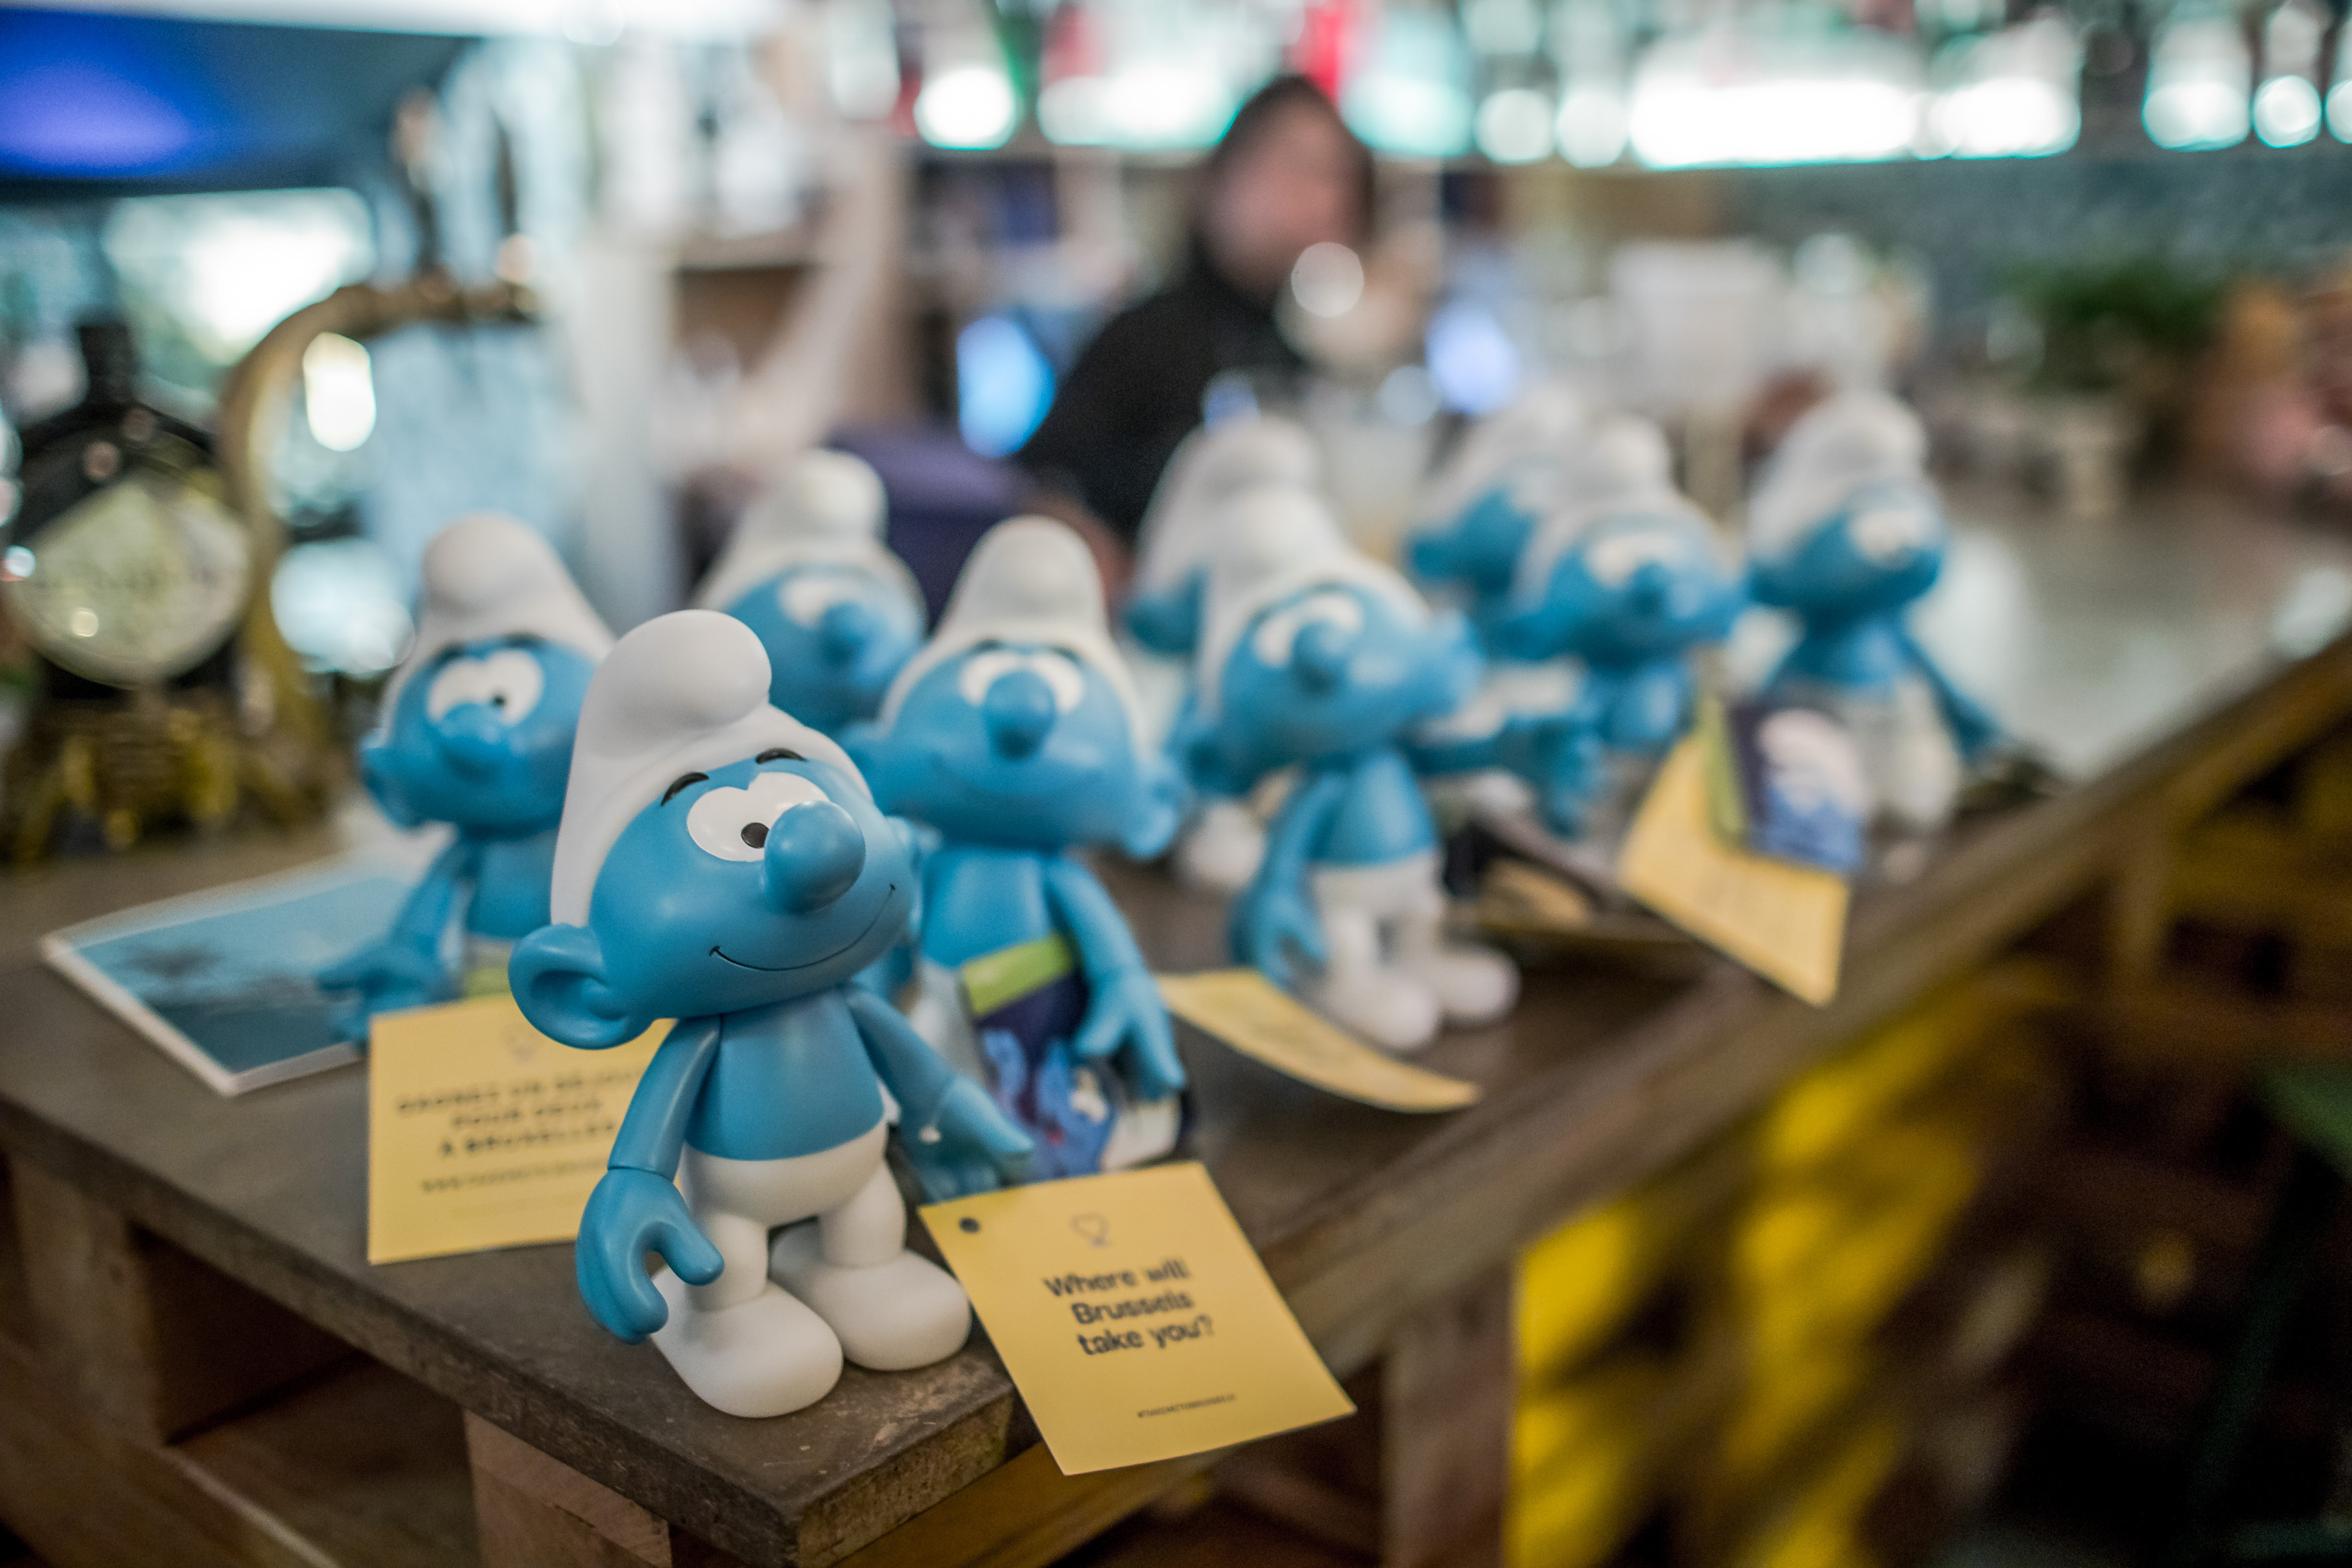 A Smurfs collection in Brussels